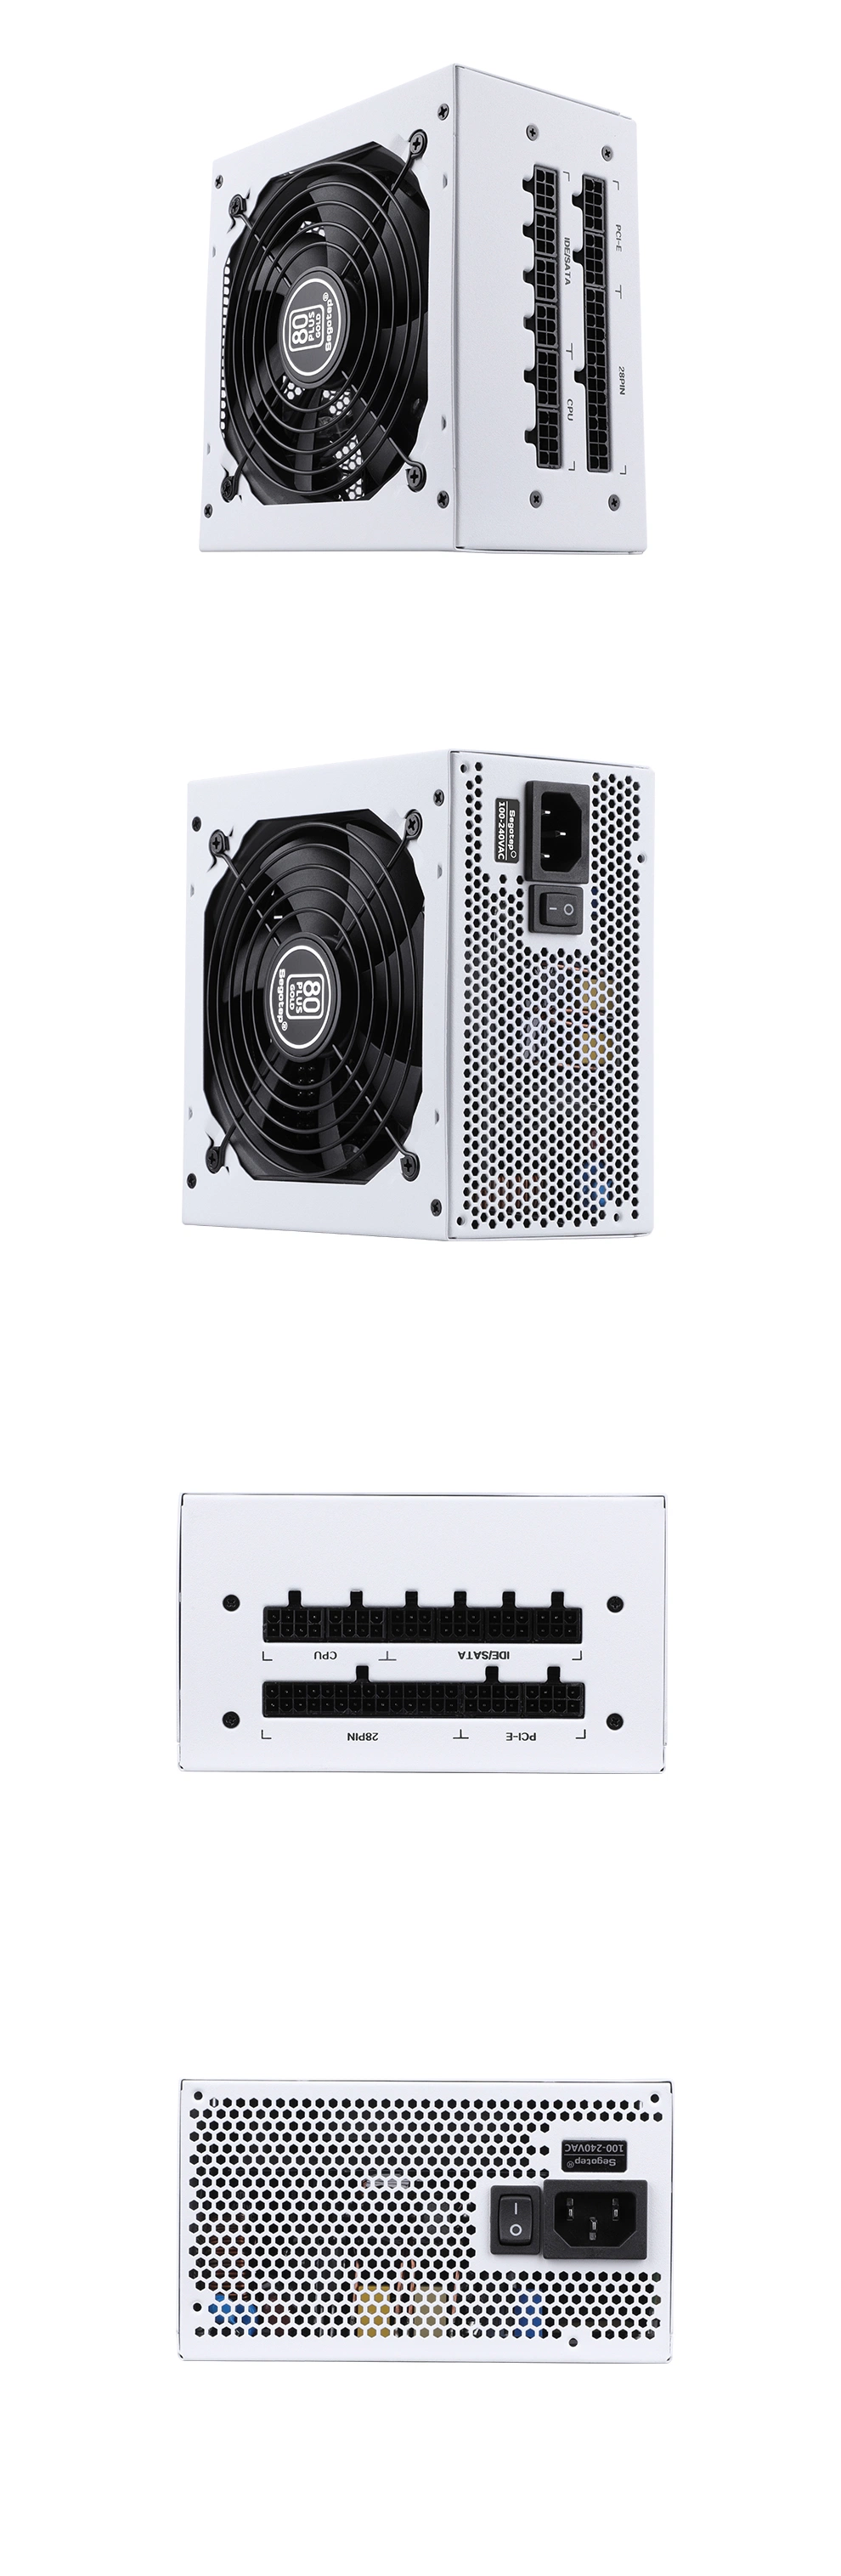 Segotep-GM750W White-80-Plus-Gold-Full-White-Color-Modular-ATX-Switching-Power-Supply-Used on-DIY Desktop-Computer